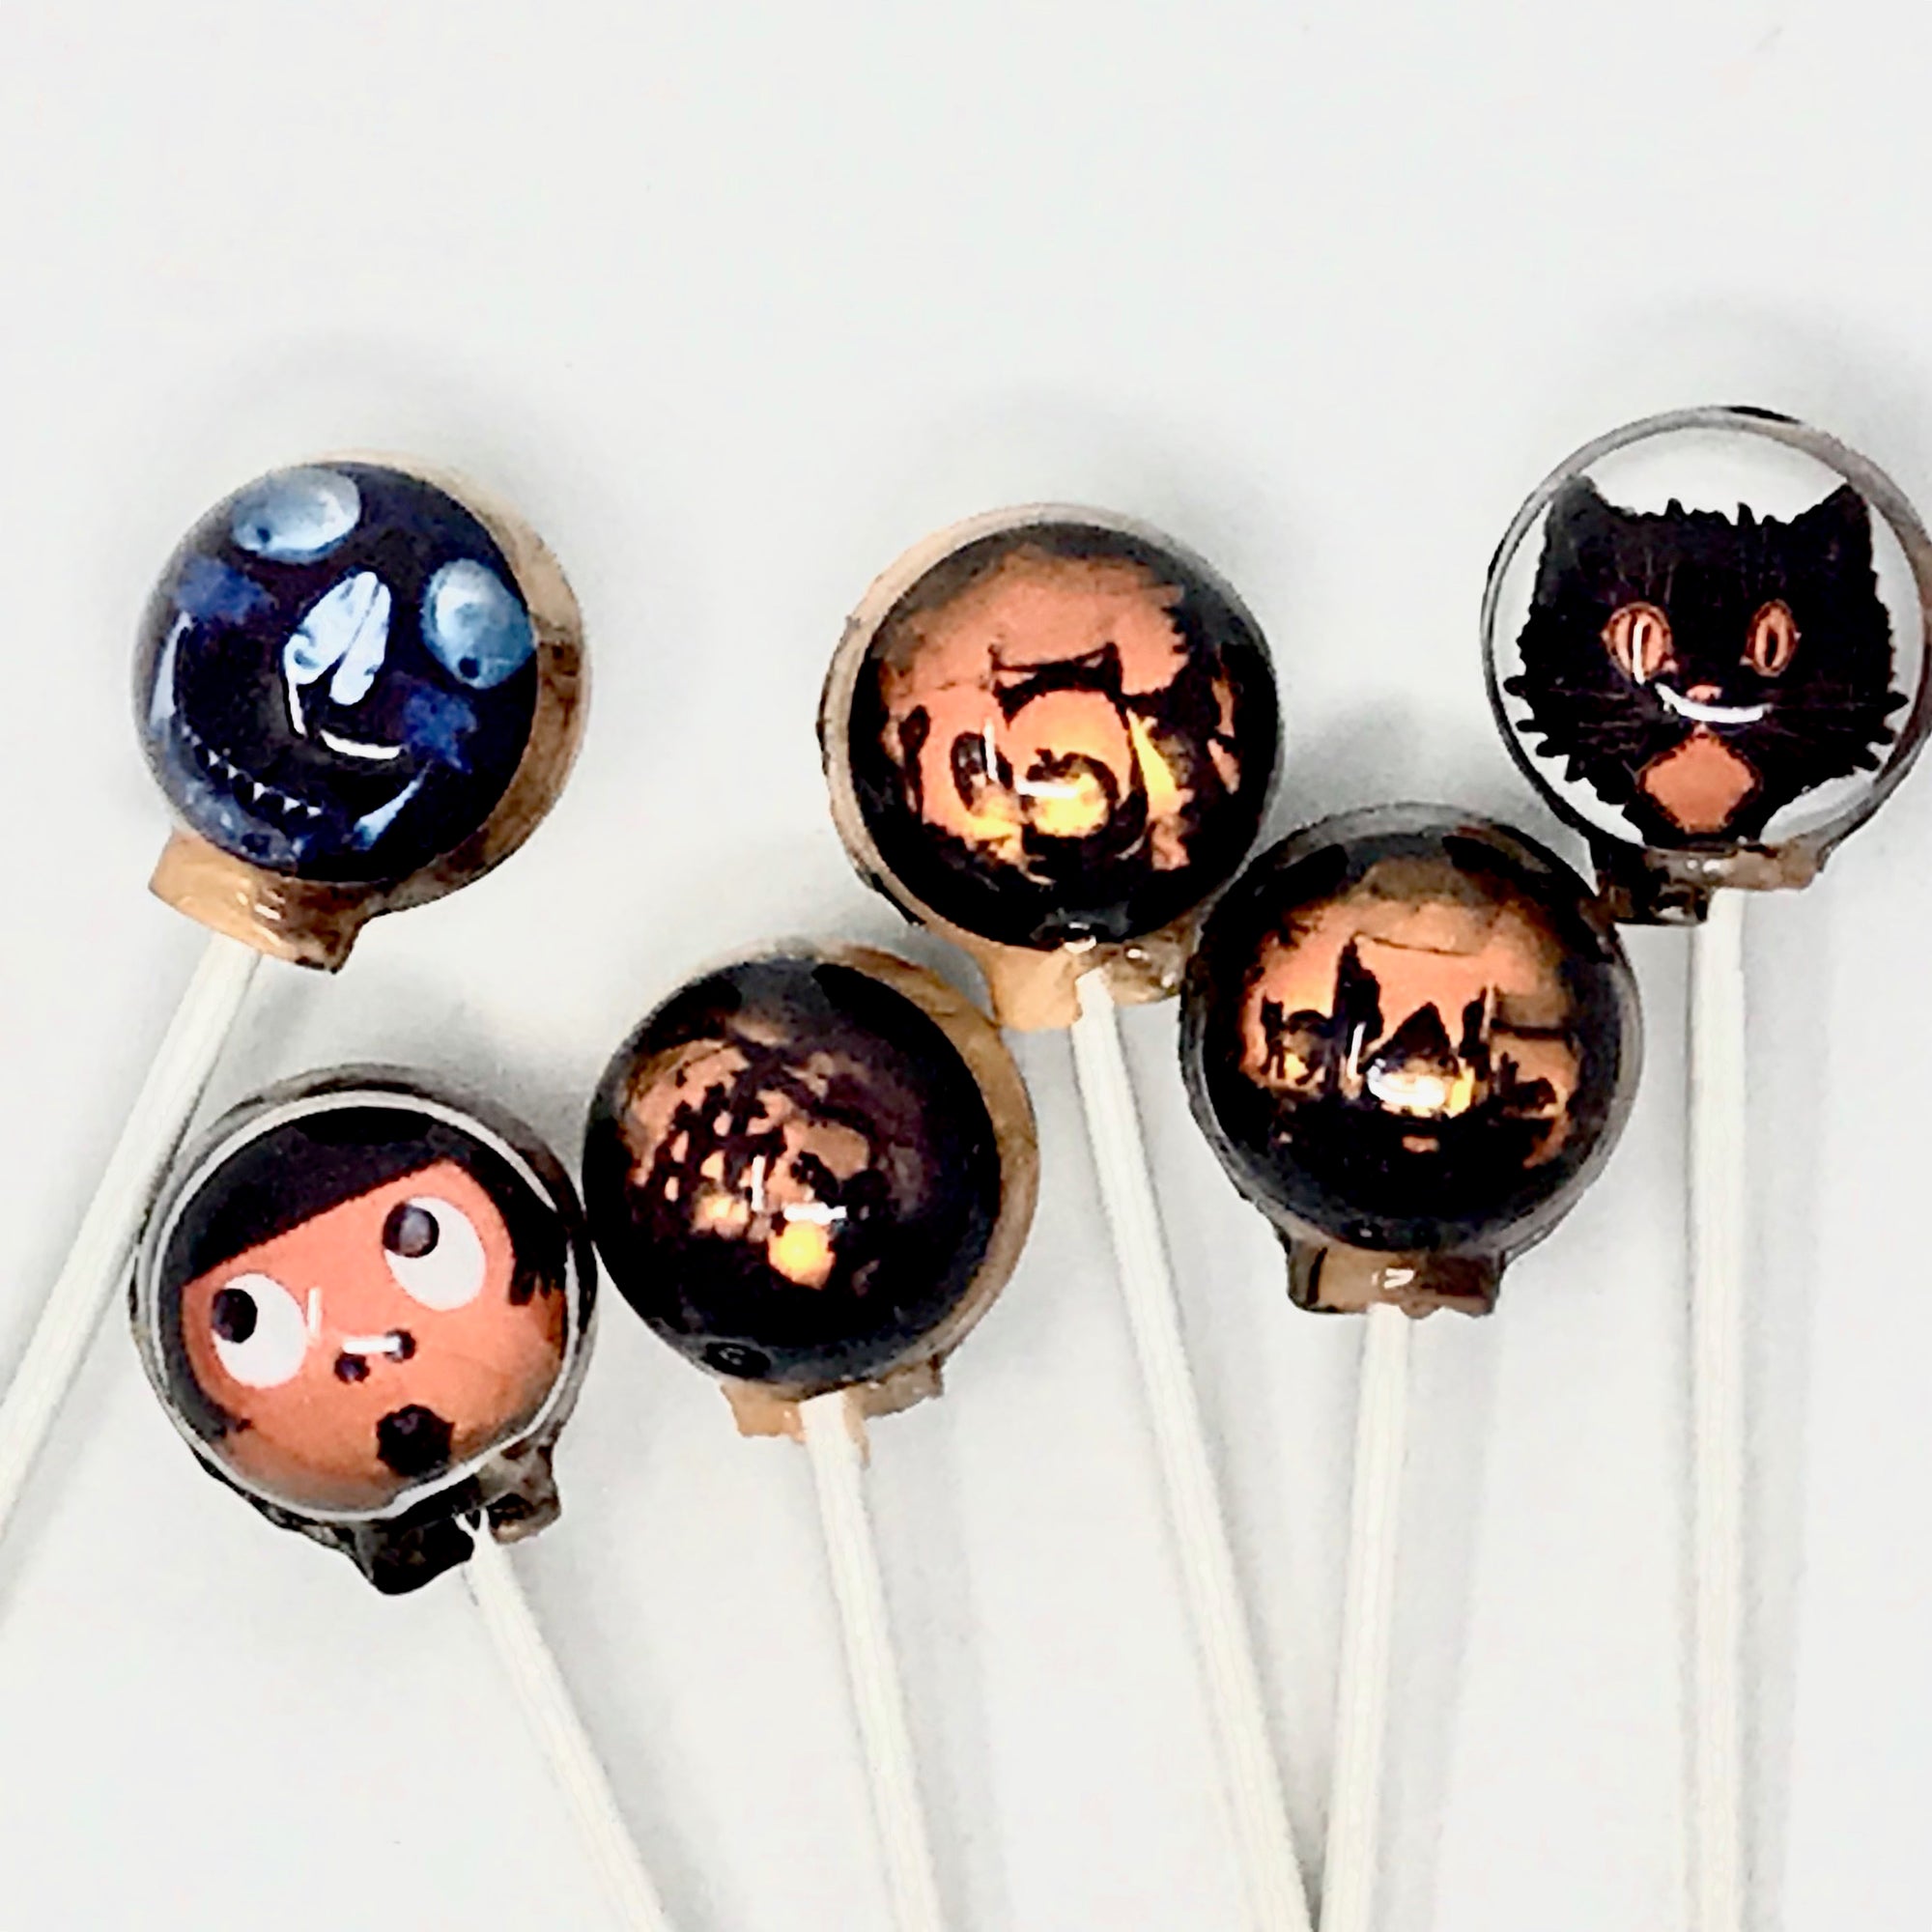 Kitschy Pumpkin Carving Lollipops 6-piece set by I Want Candy!